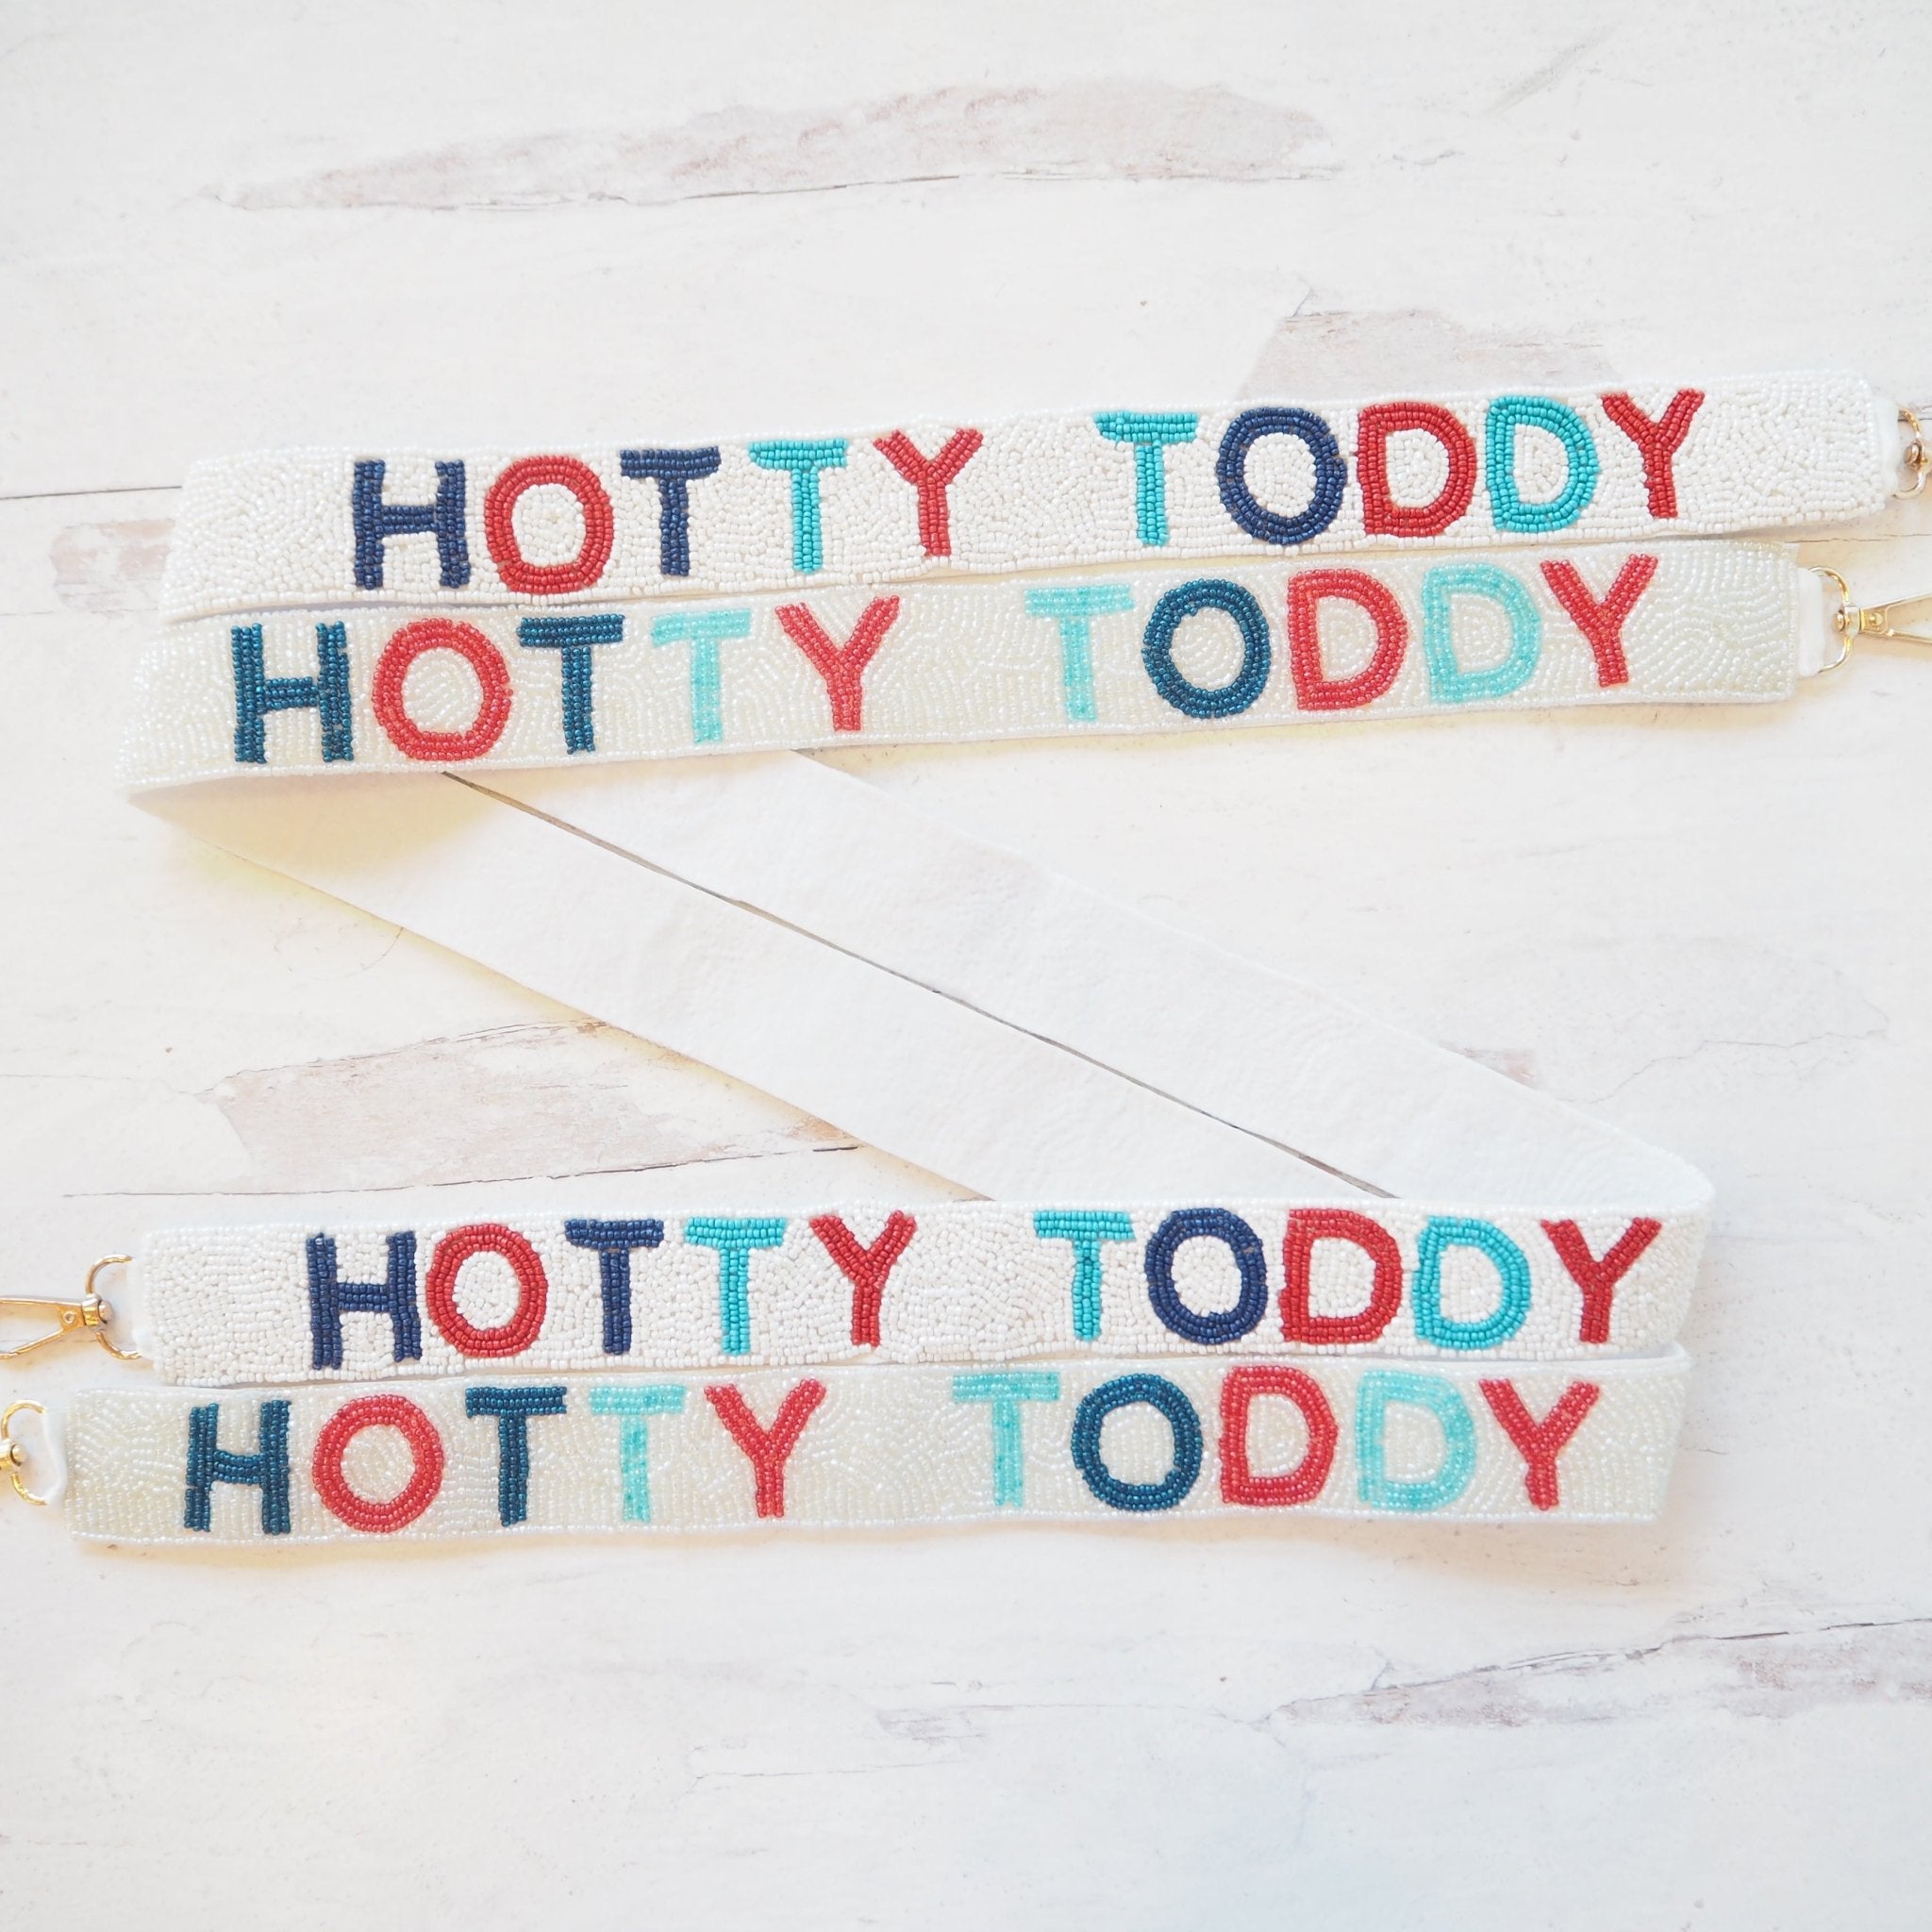 Ole Miss Hotty Toddy Purse Strap and Clear Crossbody Purse